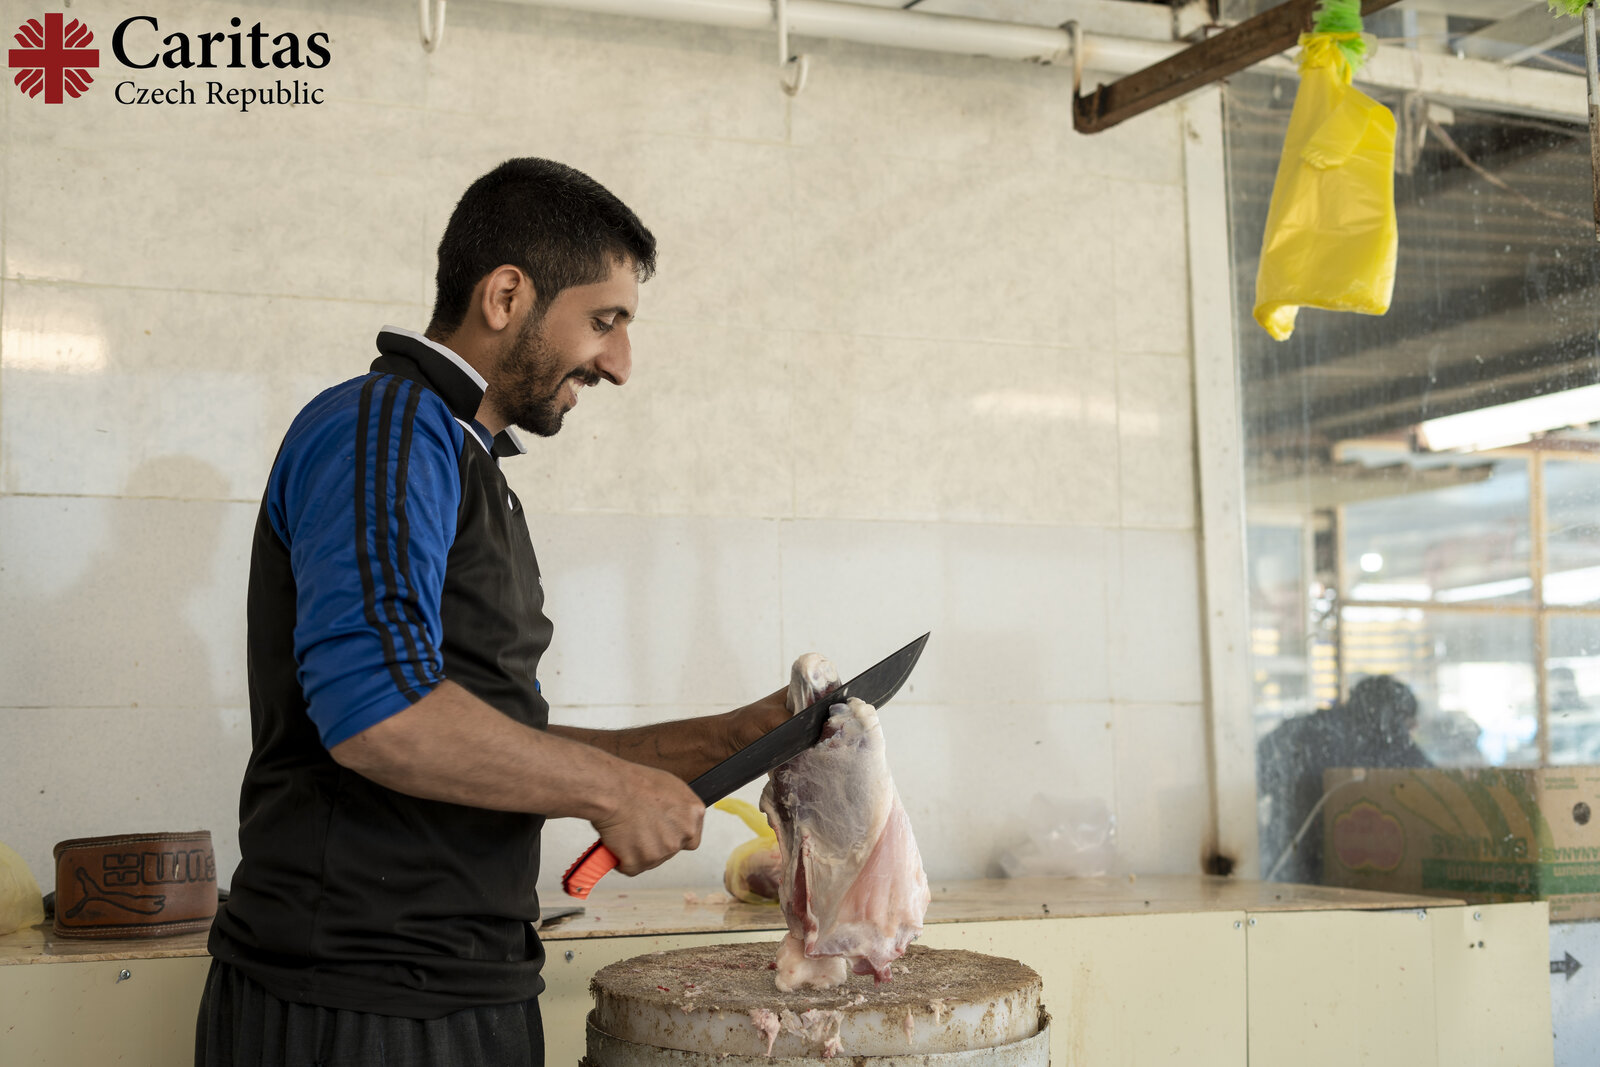 Sarri was looking for support to succeed in his butchery shop